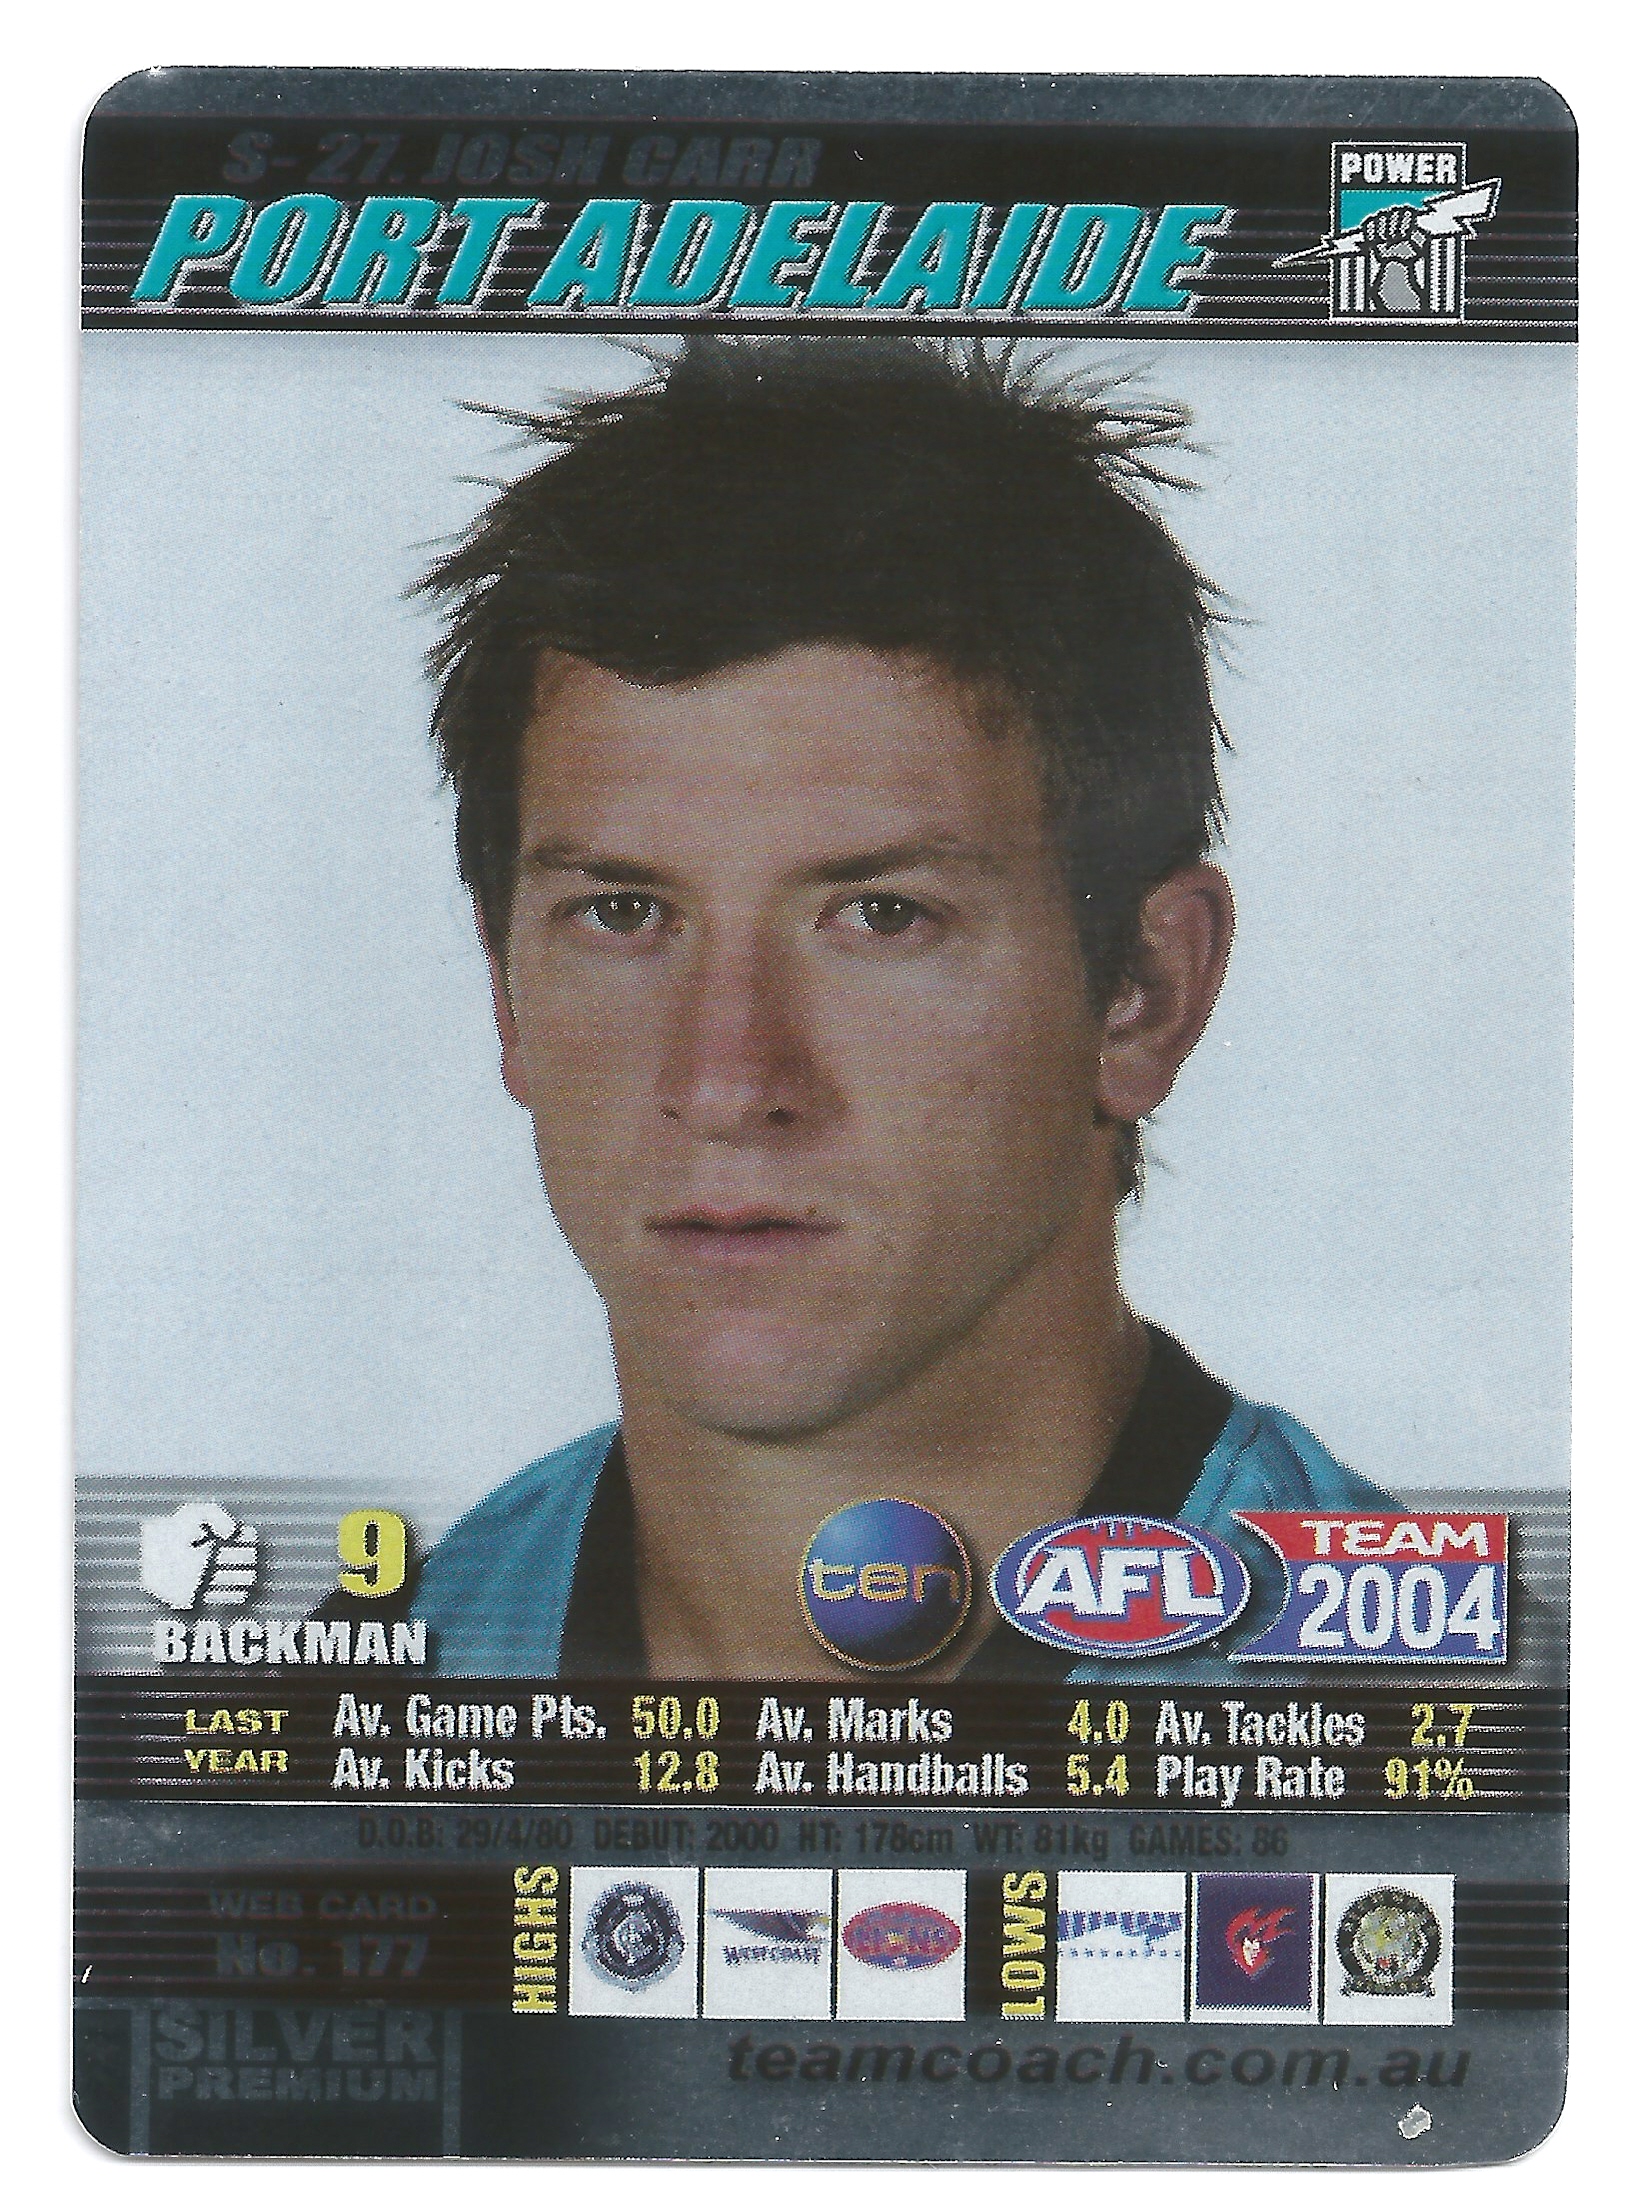 2004 Teamcoach Silver (S-27) Josh Carr Port Adelaide